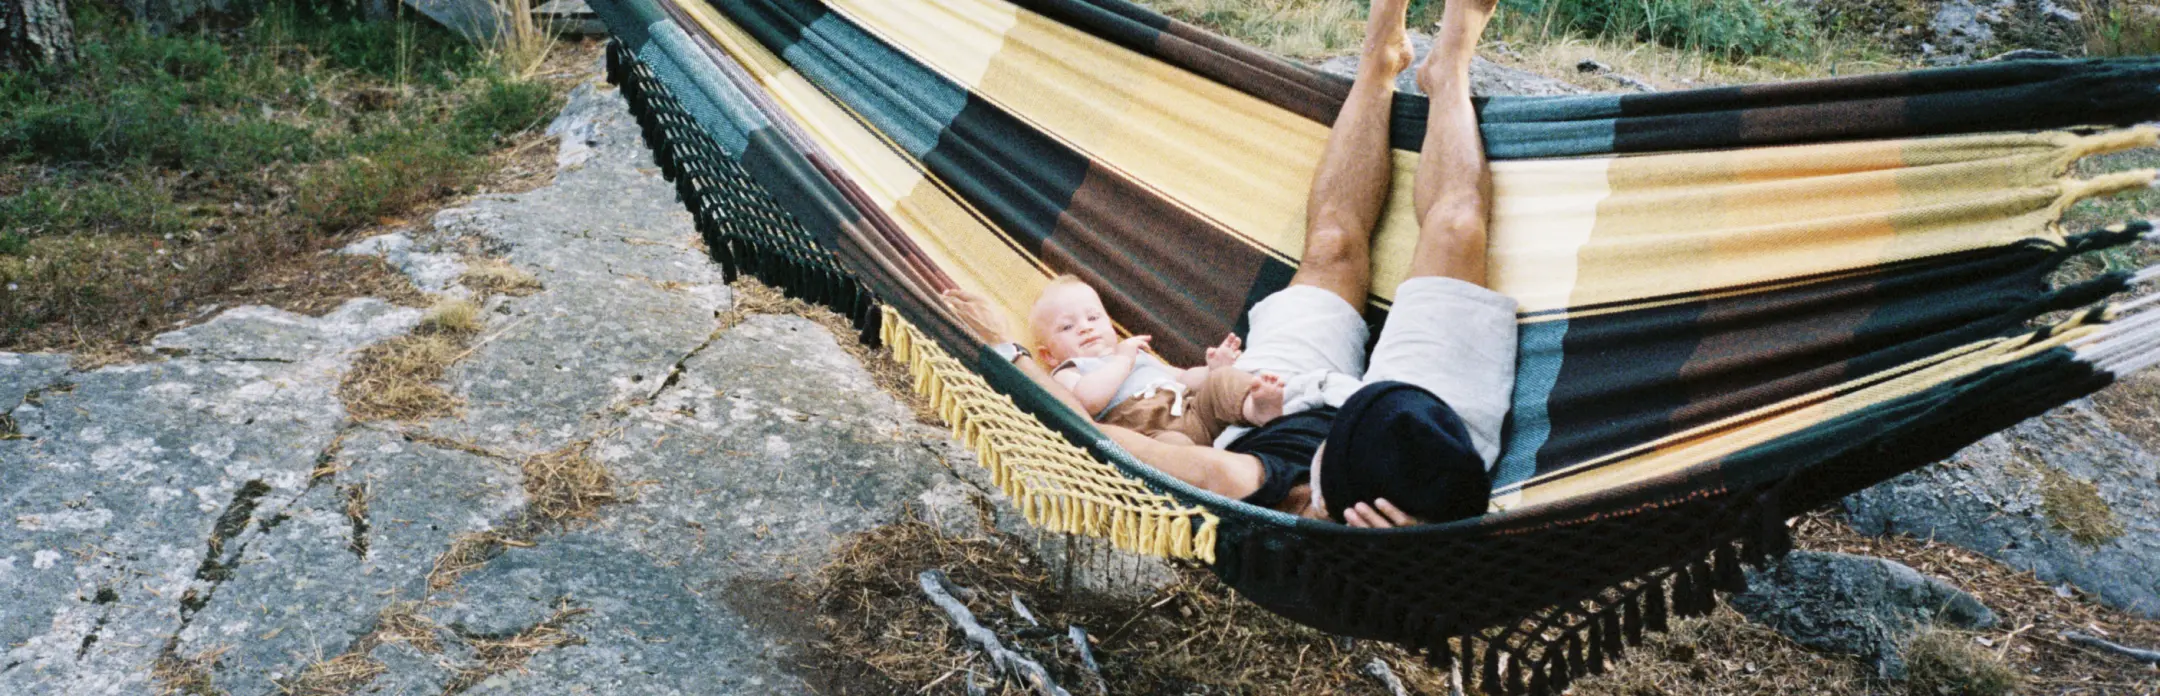 A person and a child lying in a hammock outdoors, surrounded by nature, with a small glasshouse in the background.